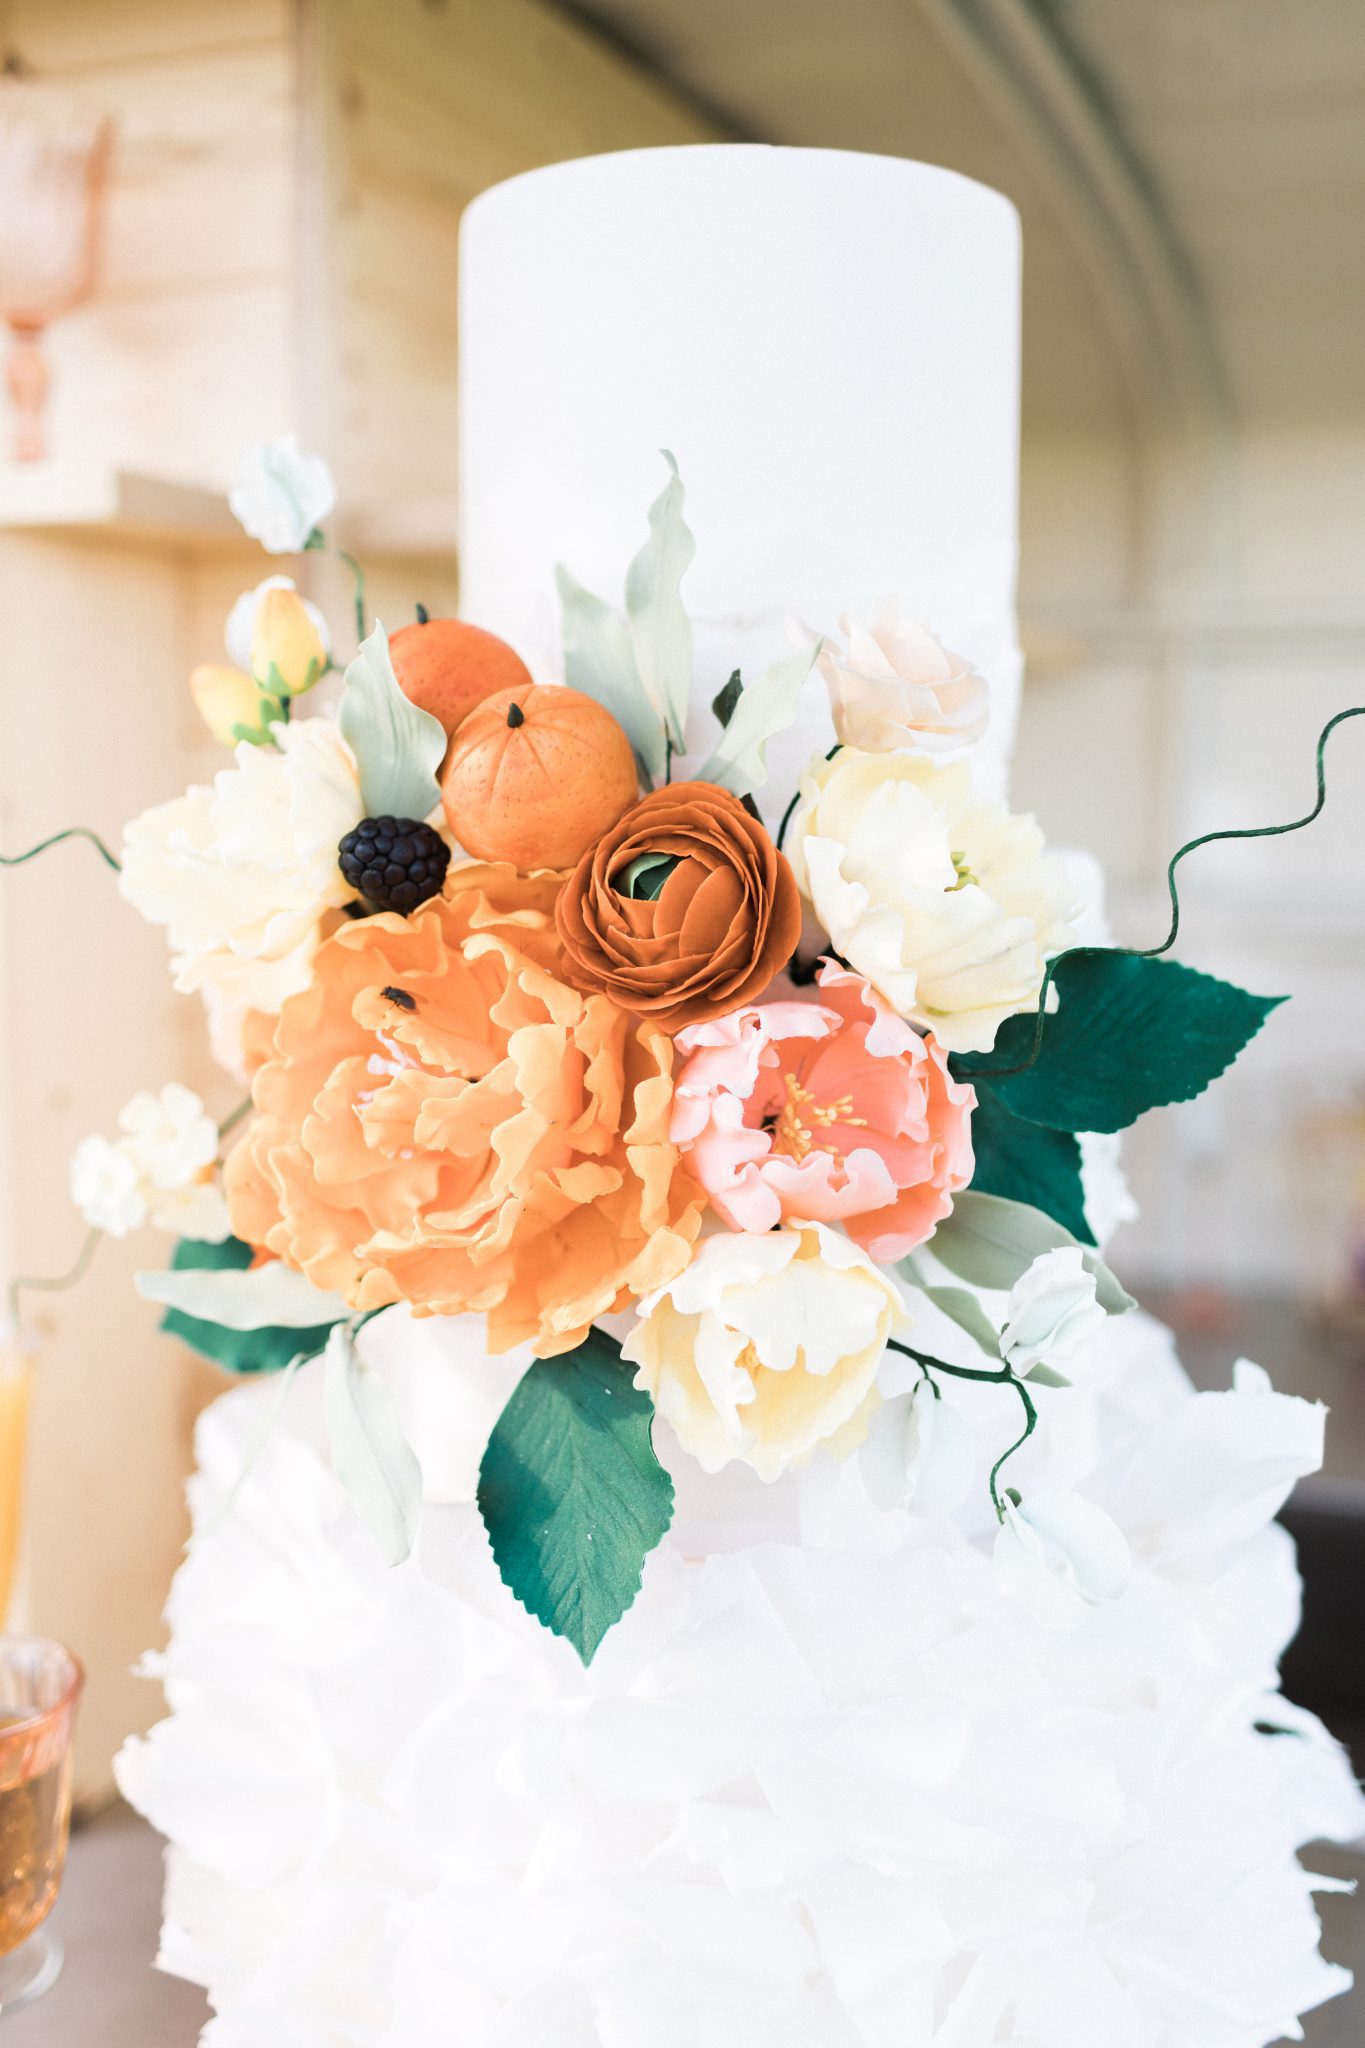 White ruffled cake with tangerine and floral accents